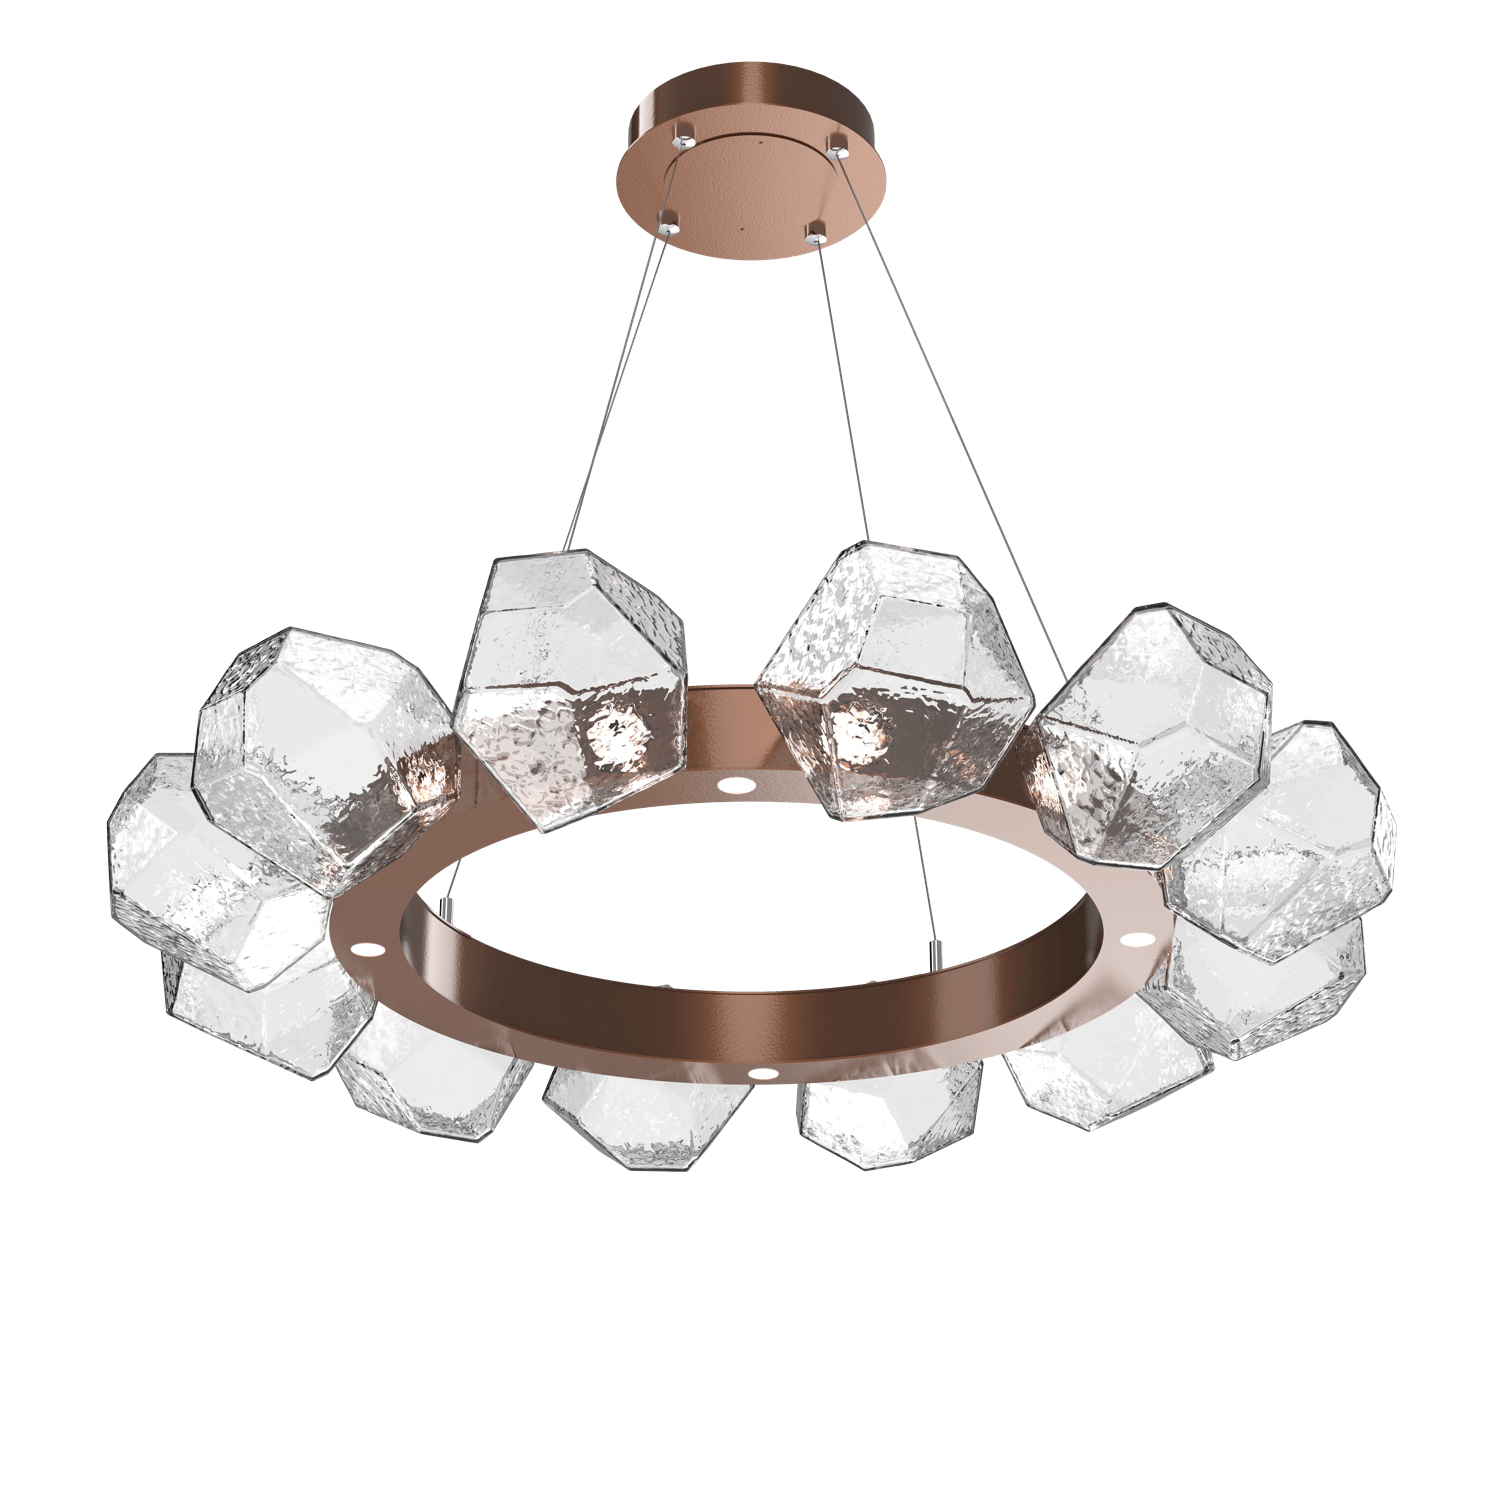 CHB0039-36-BB-C-Hammerton-Studio-Gem-36-inch-radial-ring-chandelier-with-burnished-bronze-finish-and-clear-blown-glass-shades-and-LED-lamping